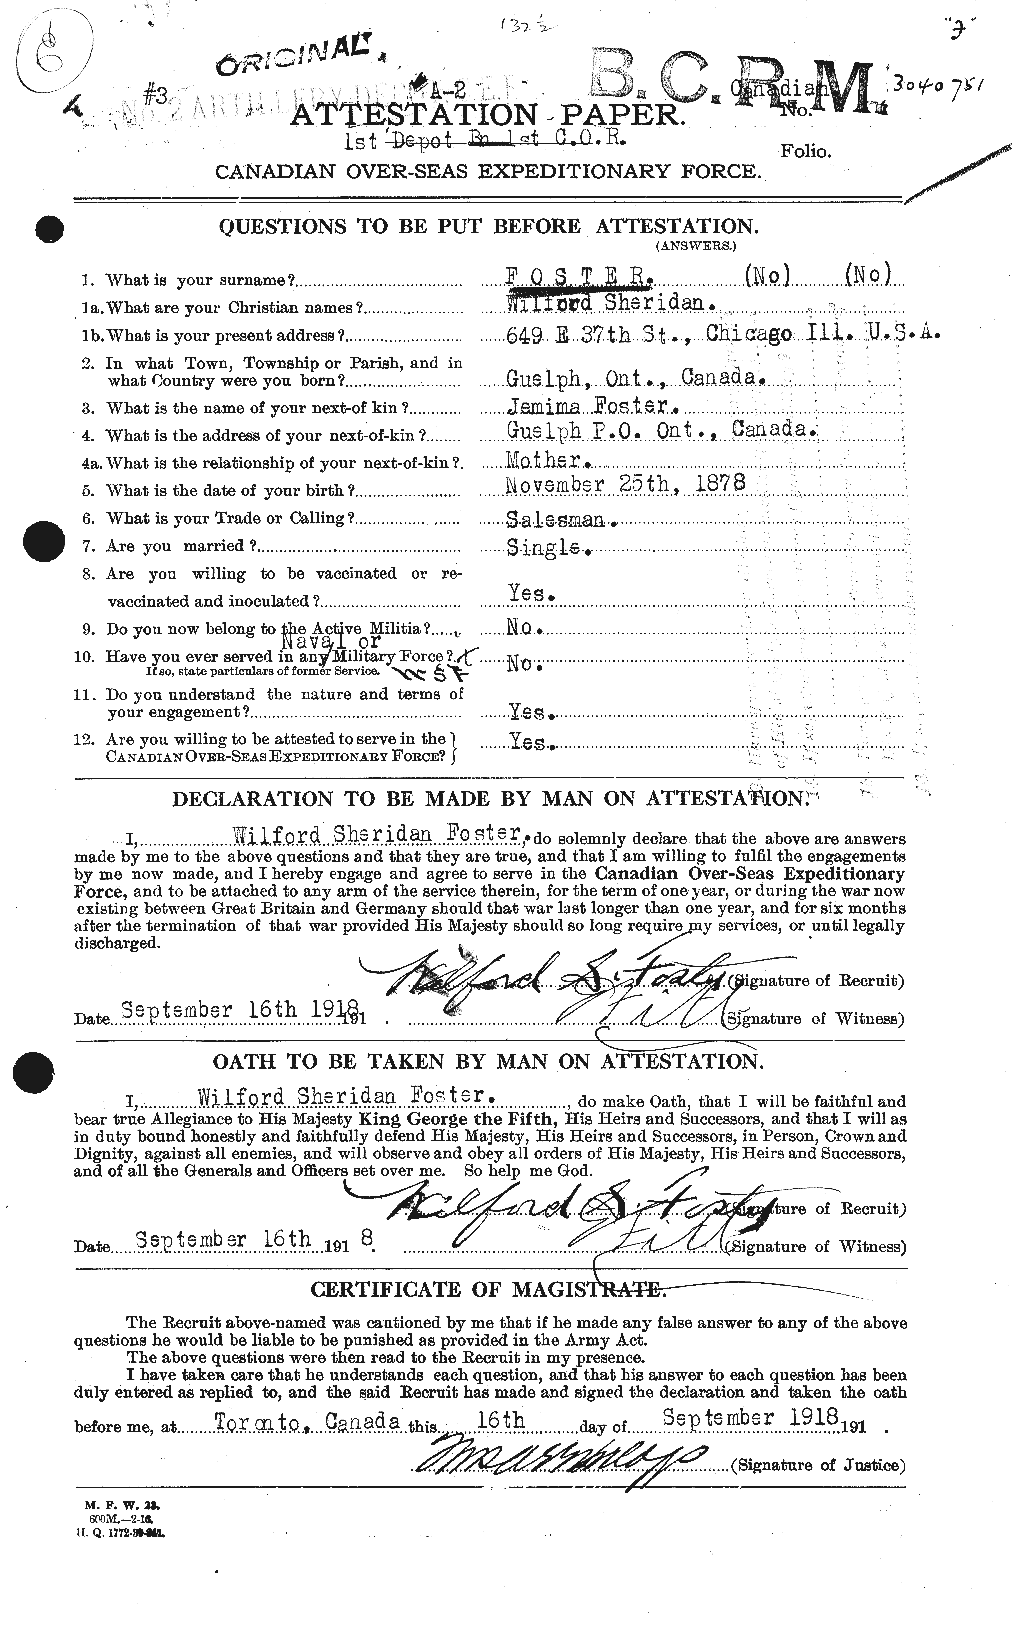 Personnel Records of the First World War - CEF 335268a